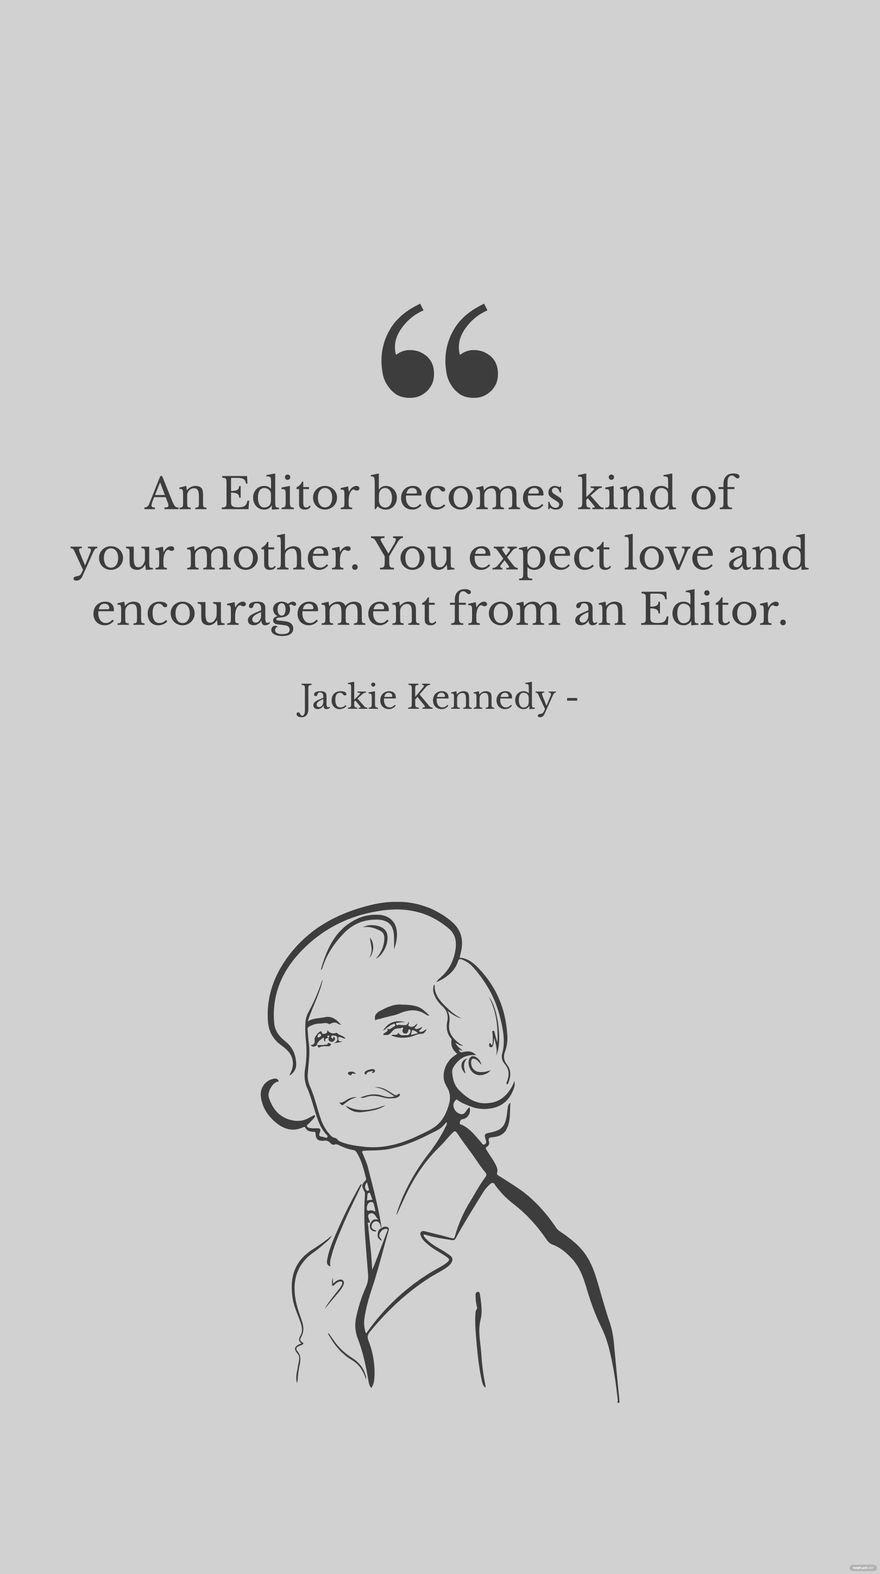 Jackie Kennedy - An Editor becomes kind of your mother. You expect love and encouragement from an Editor. in JPG